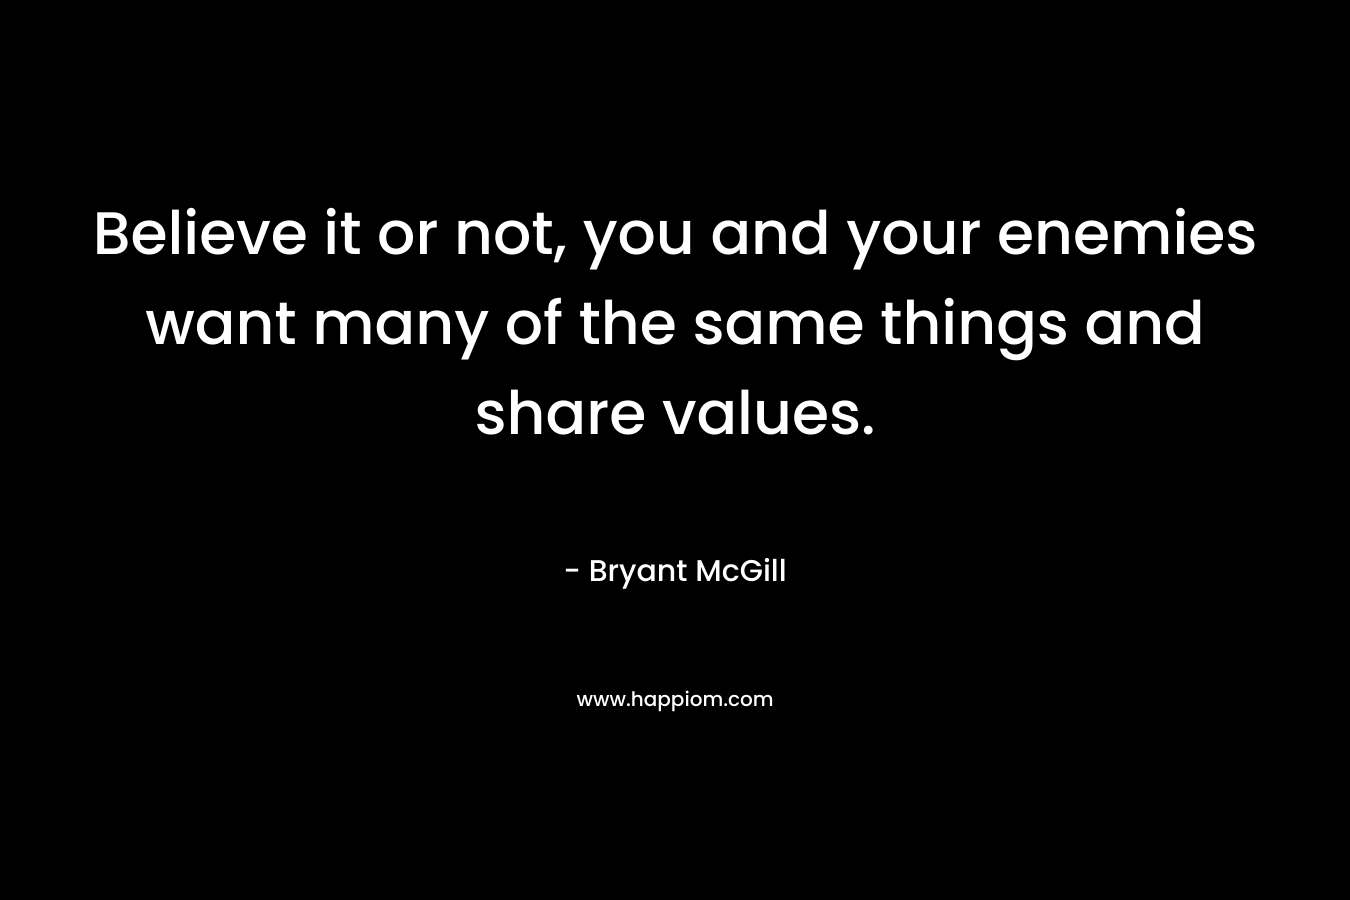 Believe it or not, you and your enemies want many of the same things and share values.